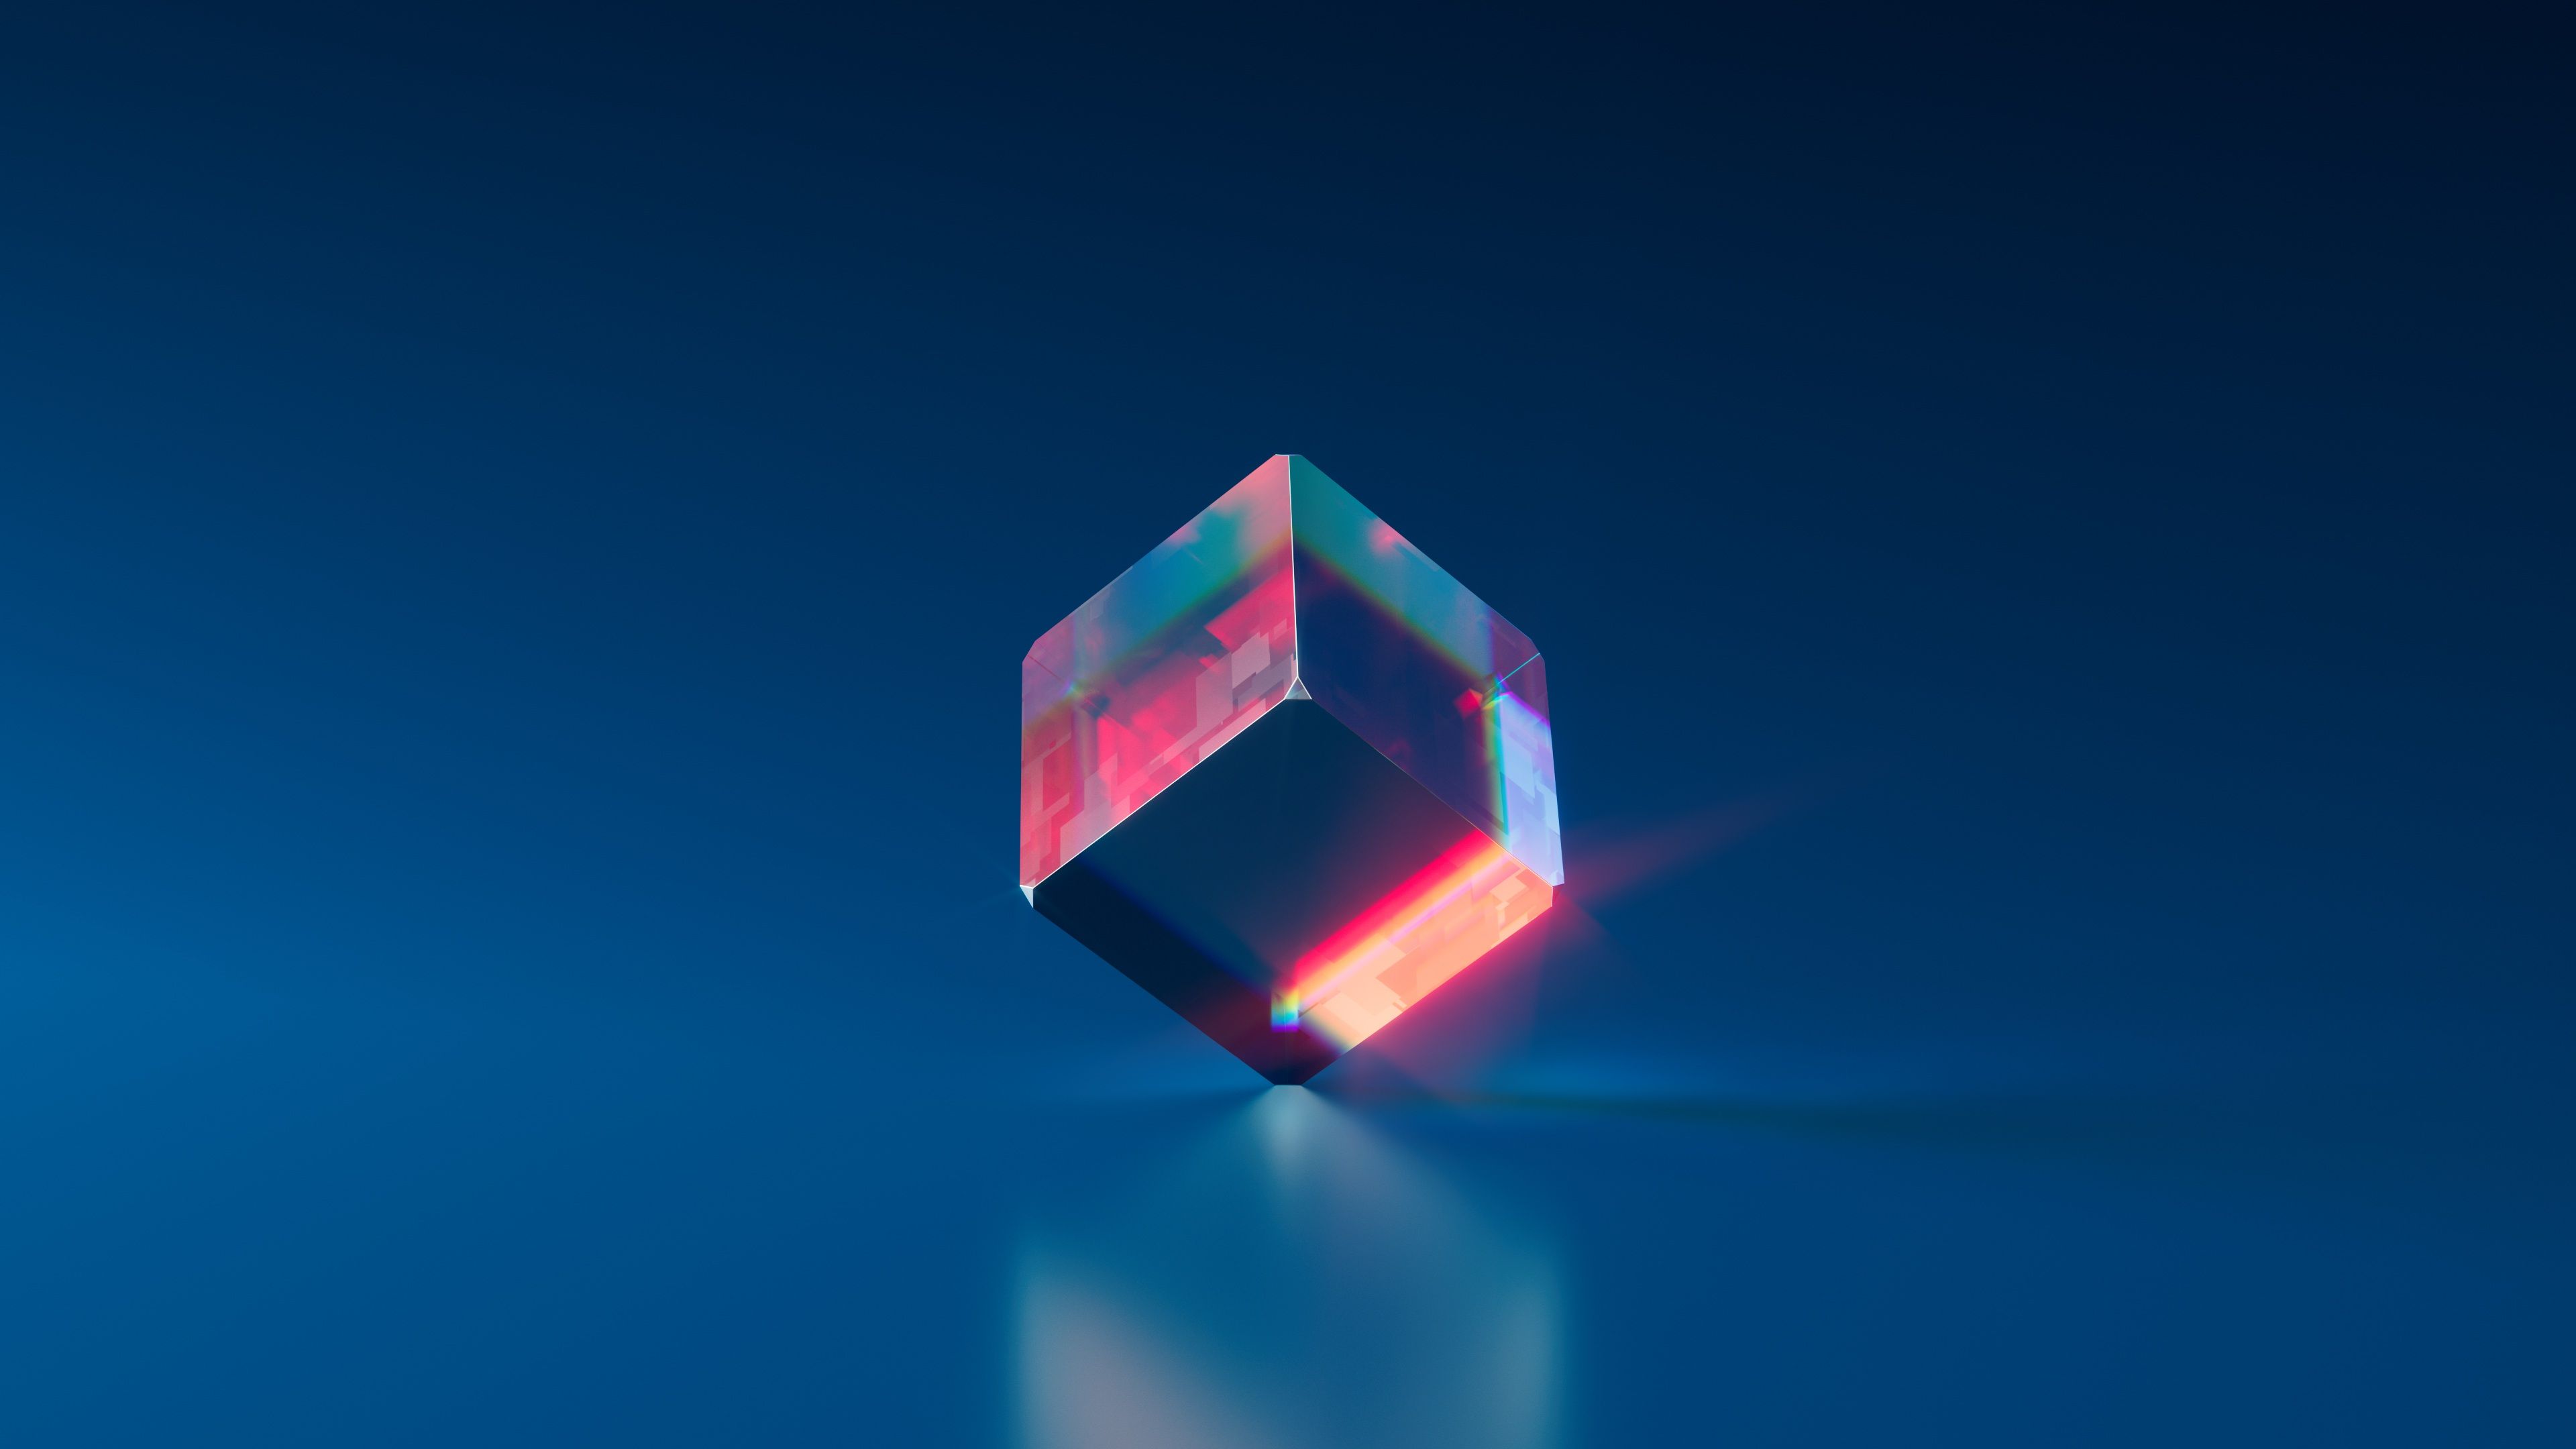 Cube 4K wallpaper for your desktop or mobile screen free and easy to download